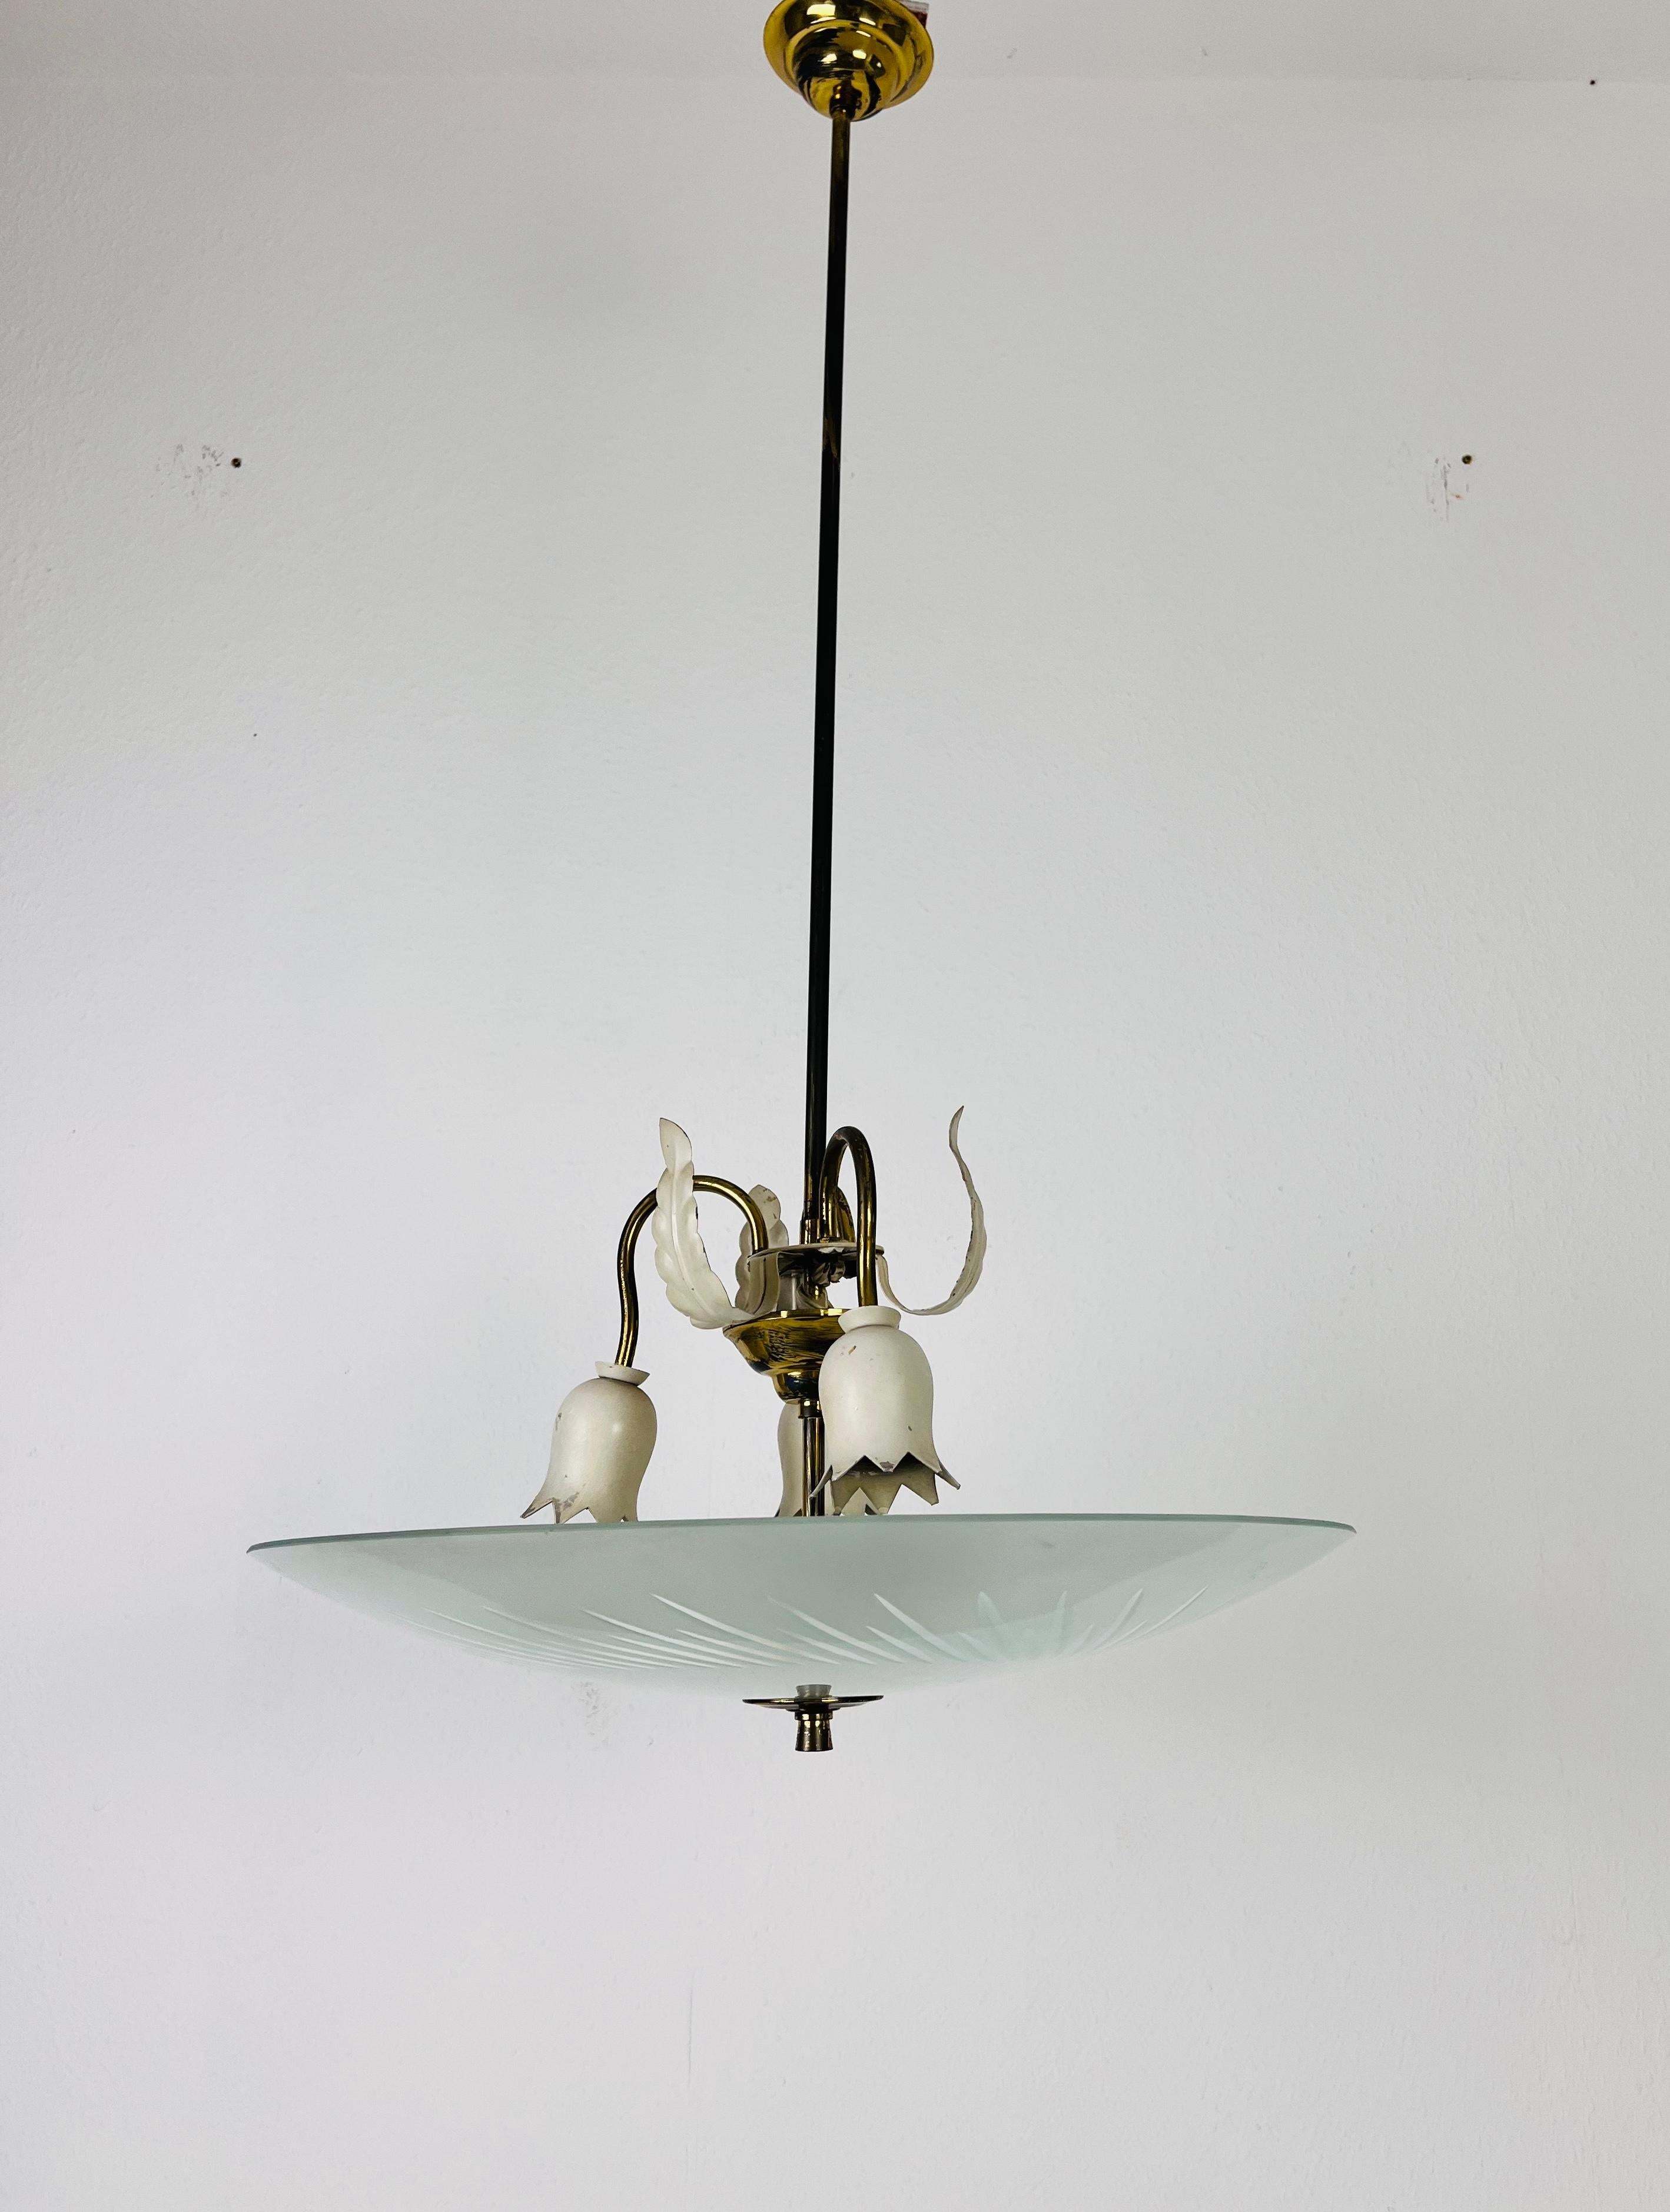 A midcentury chandelier made in Italy in the 1950s. It is fascinating with its unique saucer shape and wonderful brass elements.

The light requires 3 E27 (US E26) light bulbs under the glass element. Good vintage condition.

Free worldwide